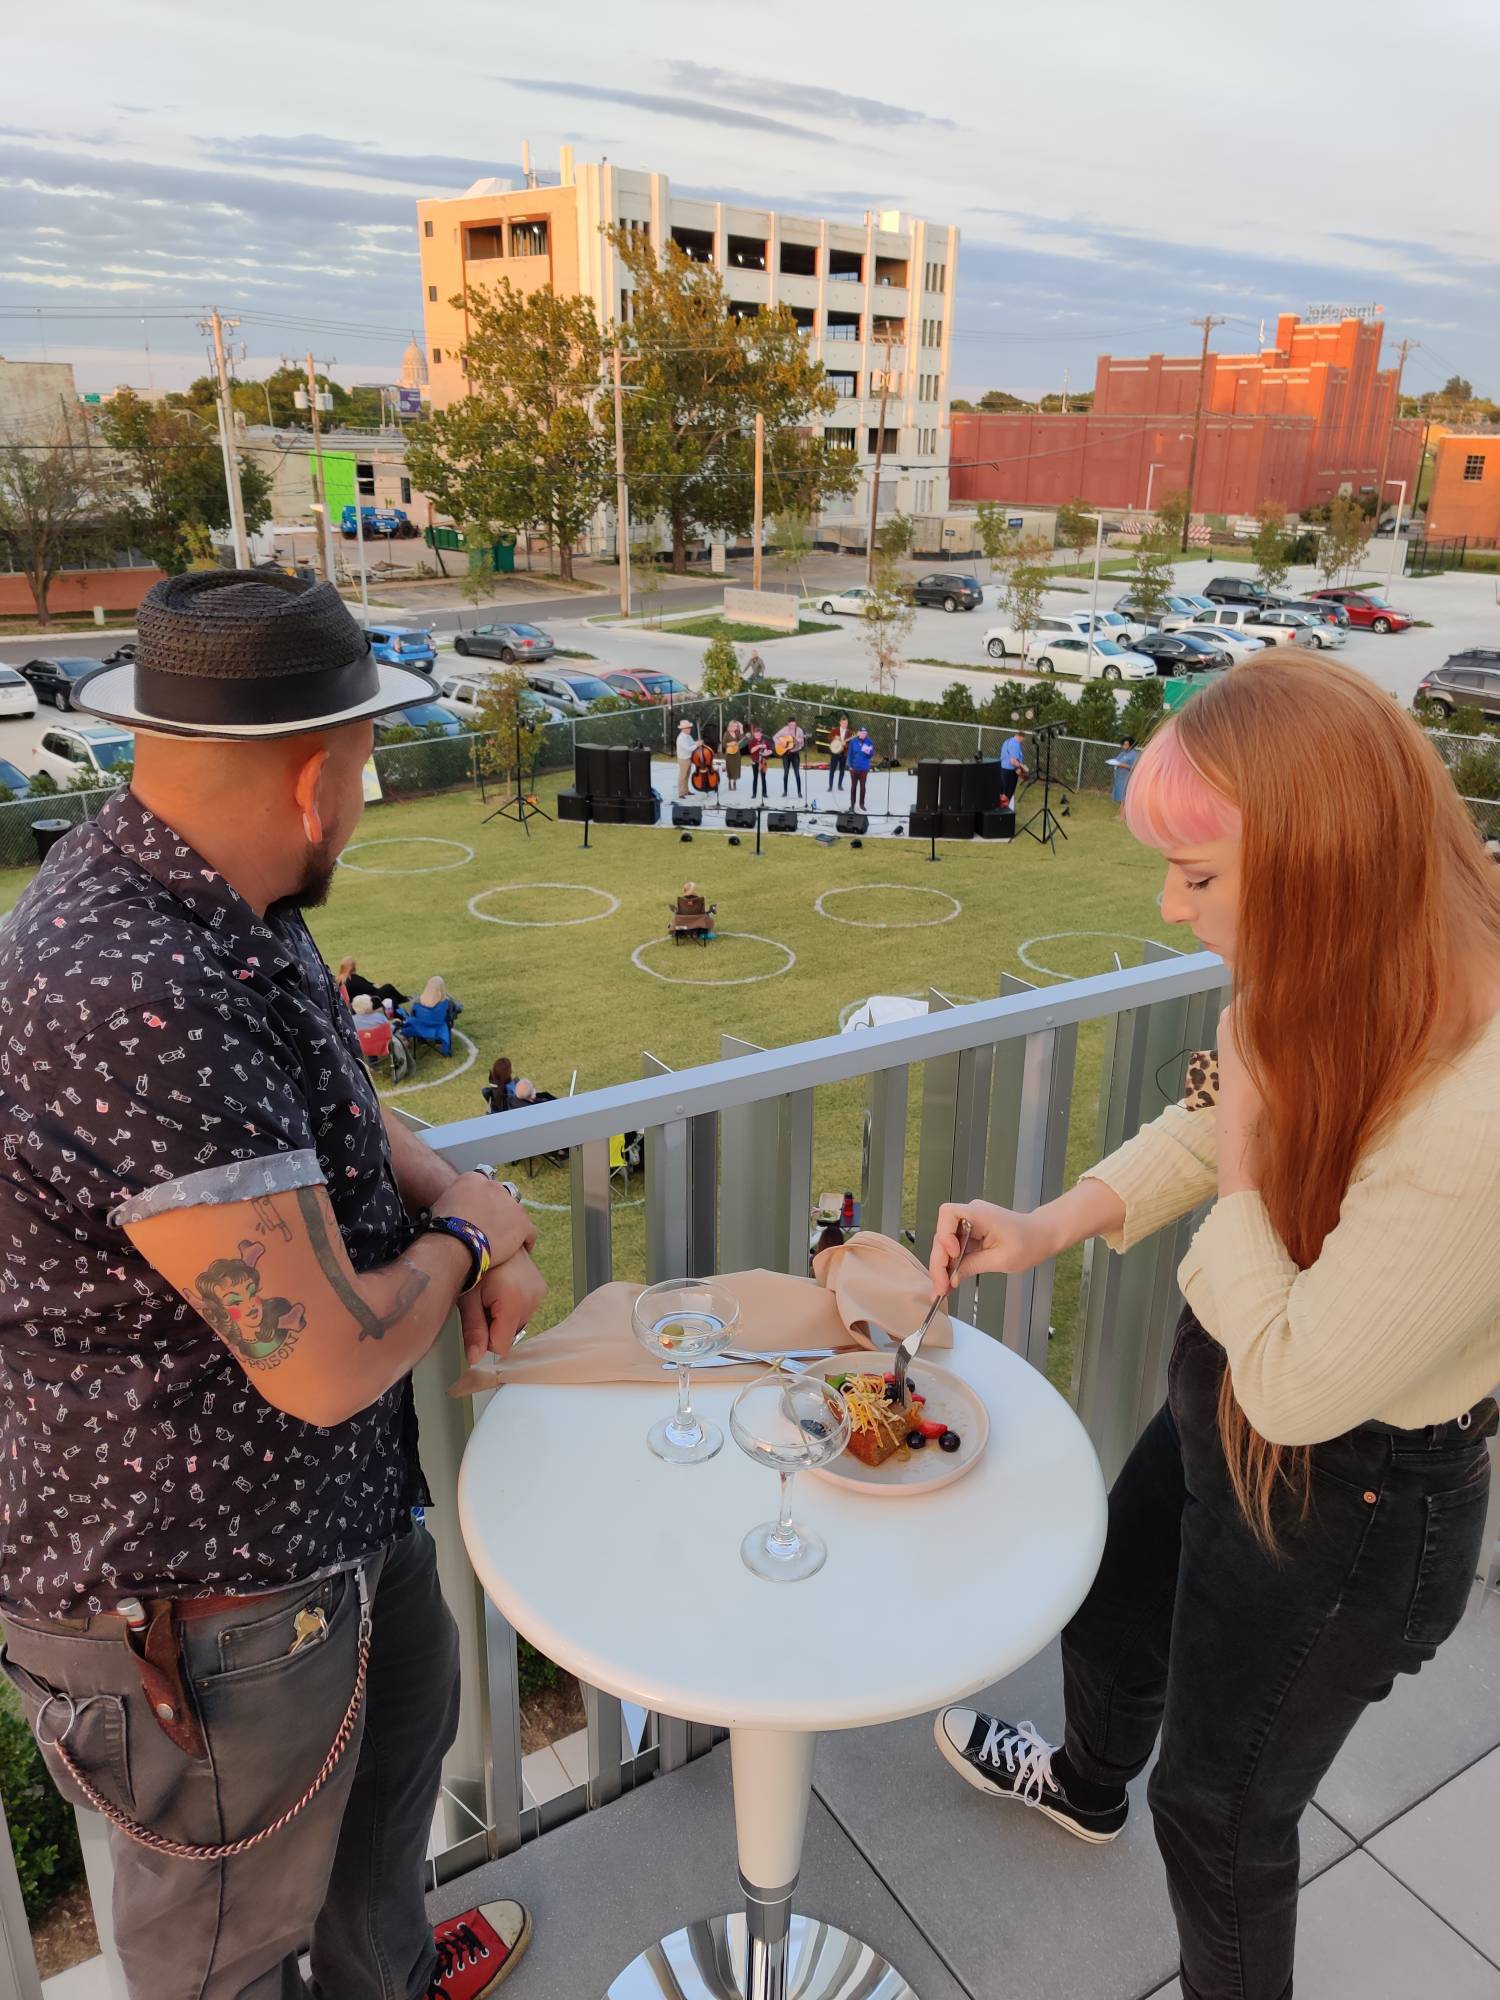 Two people eat outdoors on a patio overlooking a concert on a green lawn